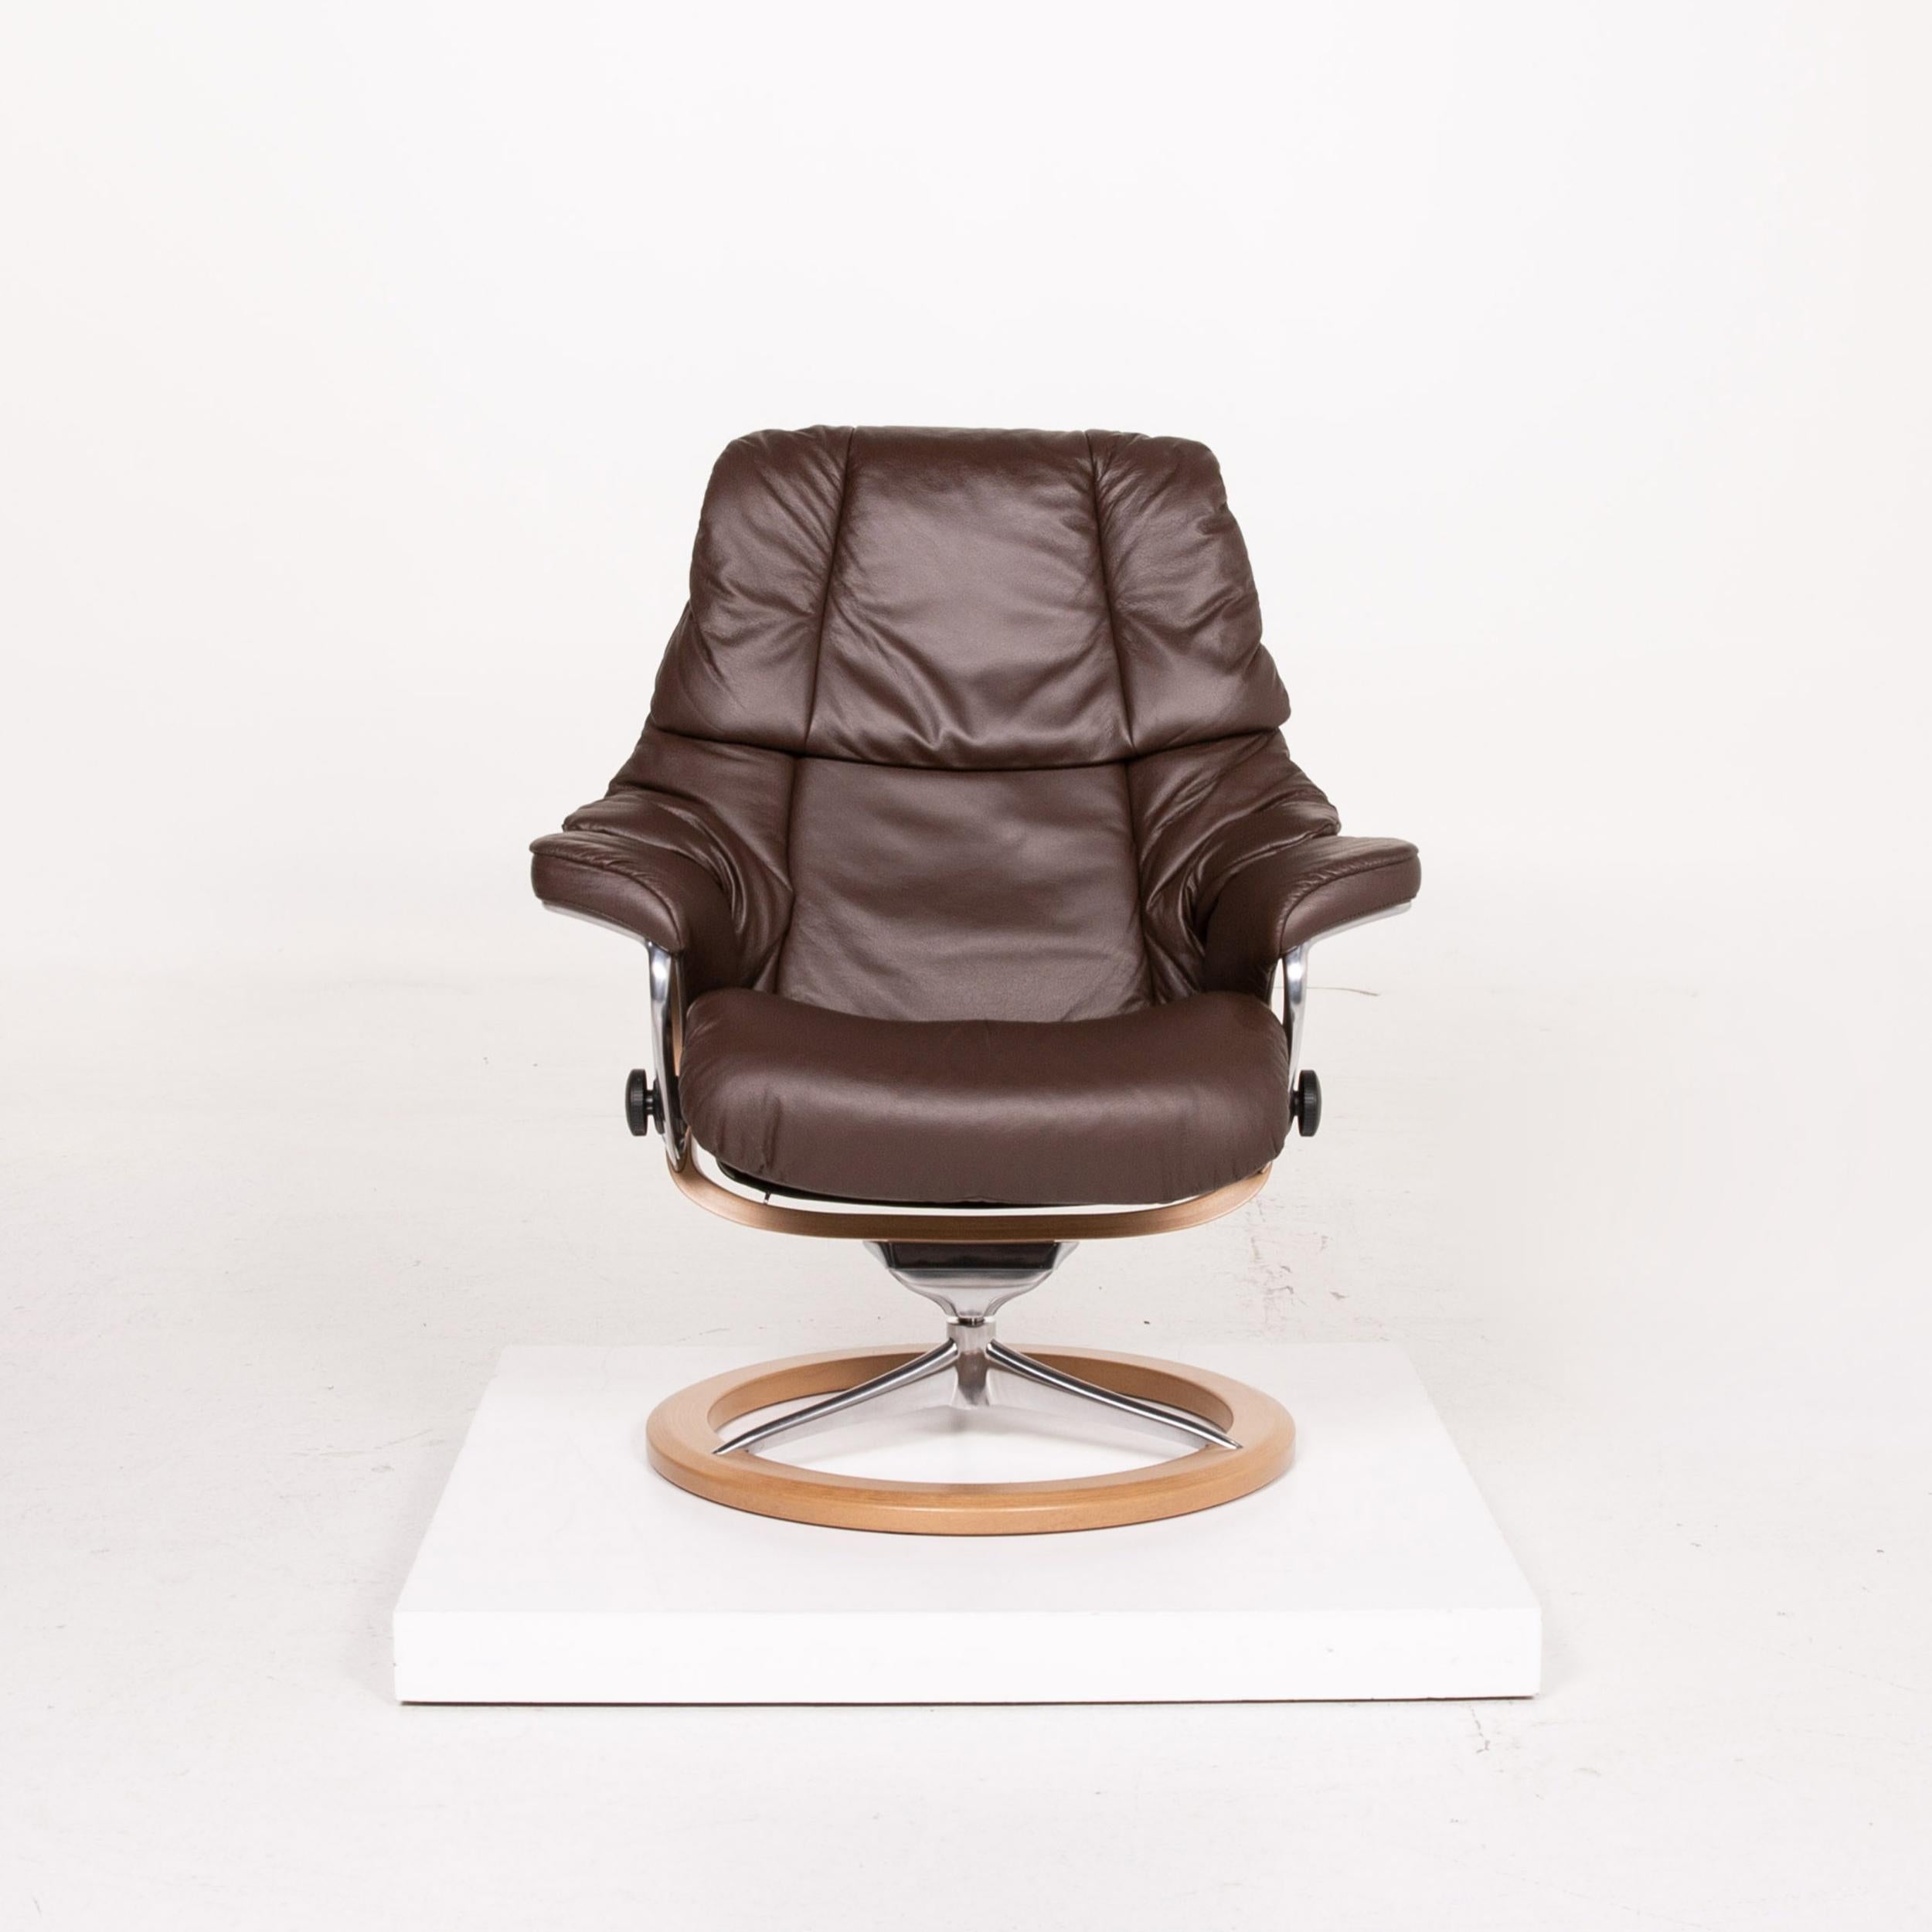 Stressless Reno Leather Armchair Incl. Stool Dark Brown Brown Relaxation 3